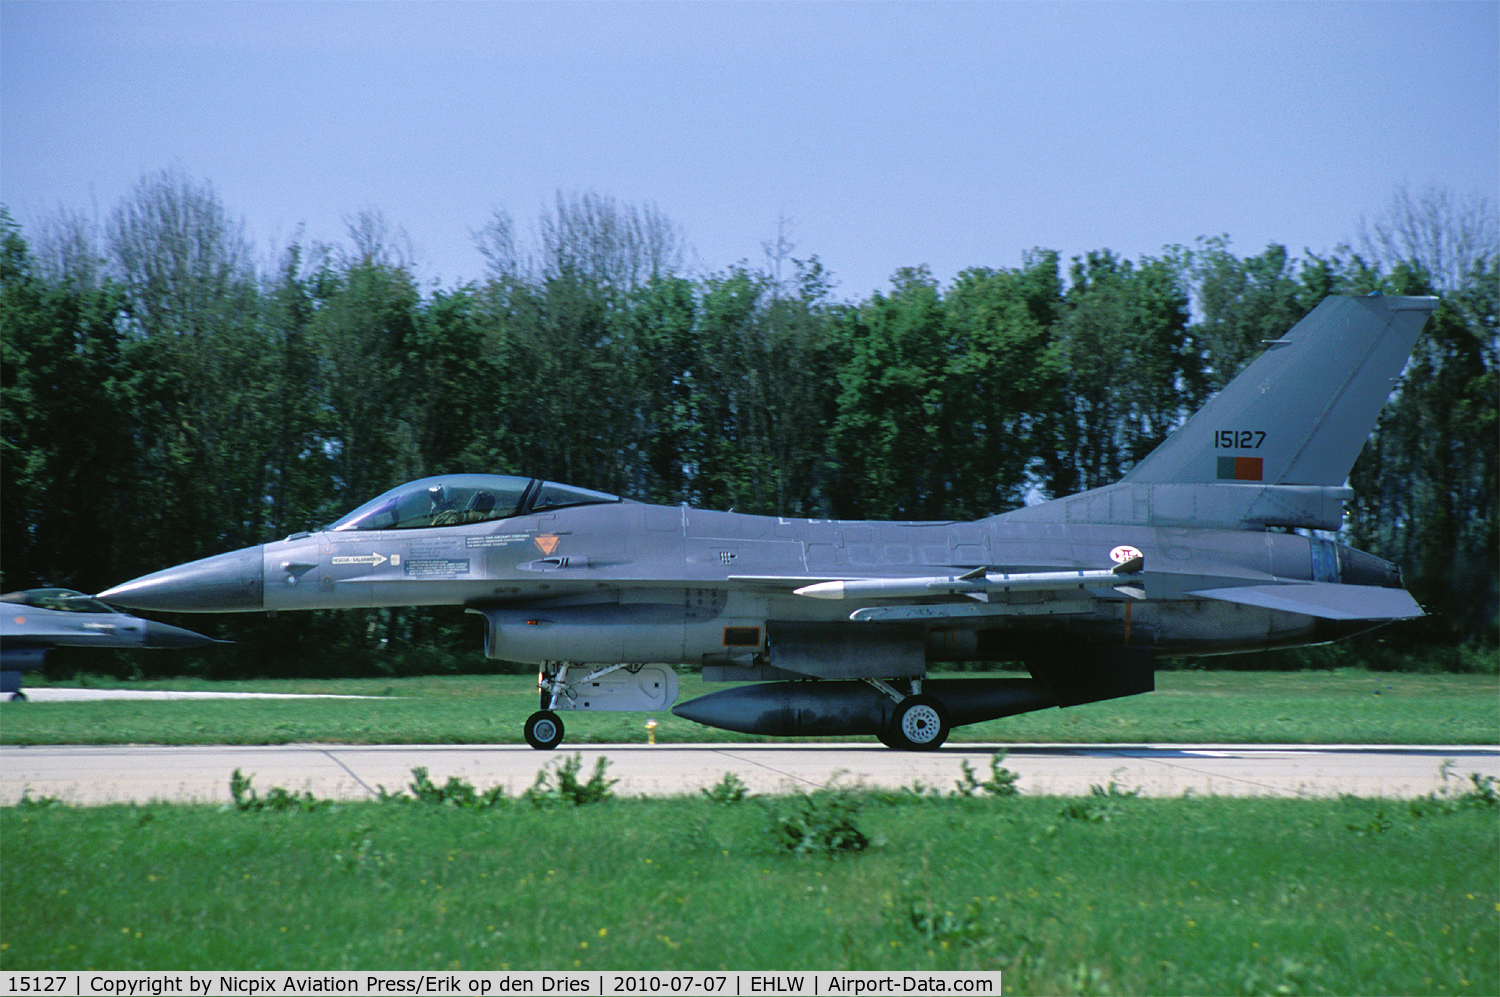 15127, General Dynamics F-16AM Fighting Falcon C/N 61-592/M17-10, Portuguese AF F-16AM 15127, armed with live AMRAAMs, seen here during the FWIT 2010 course.